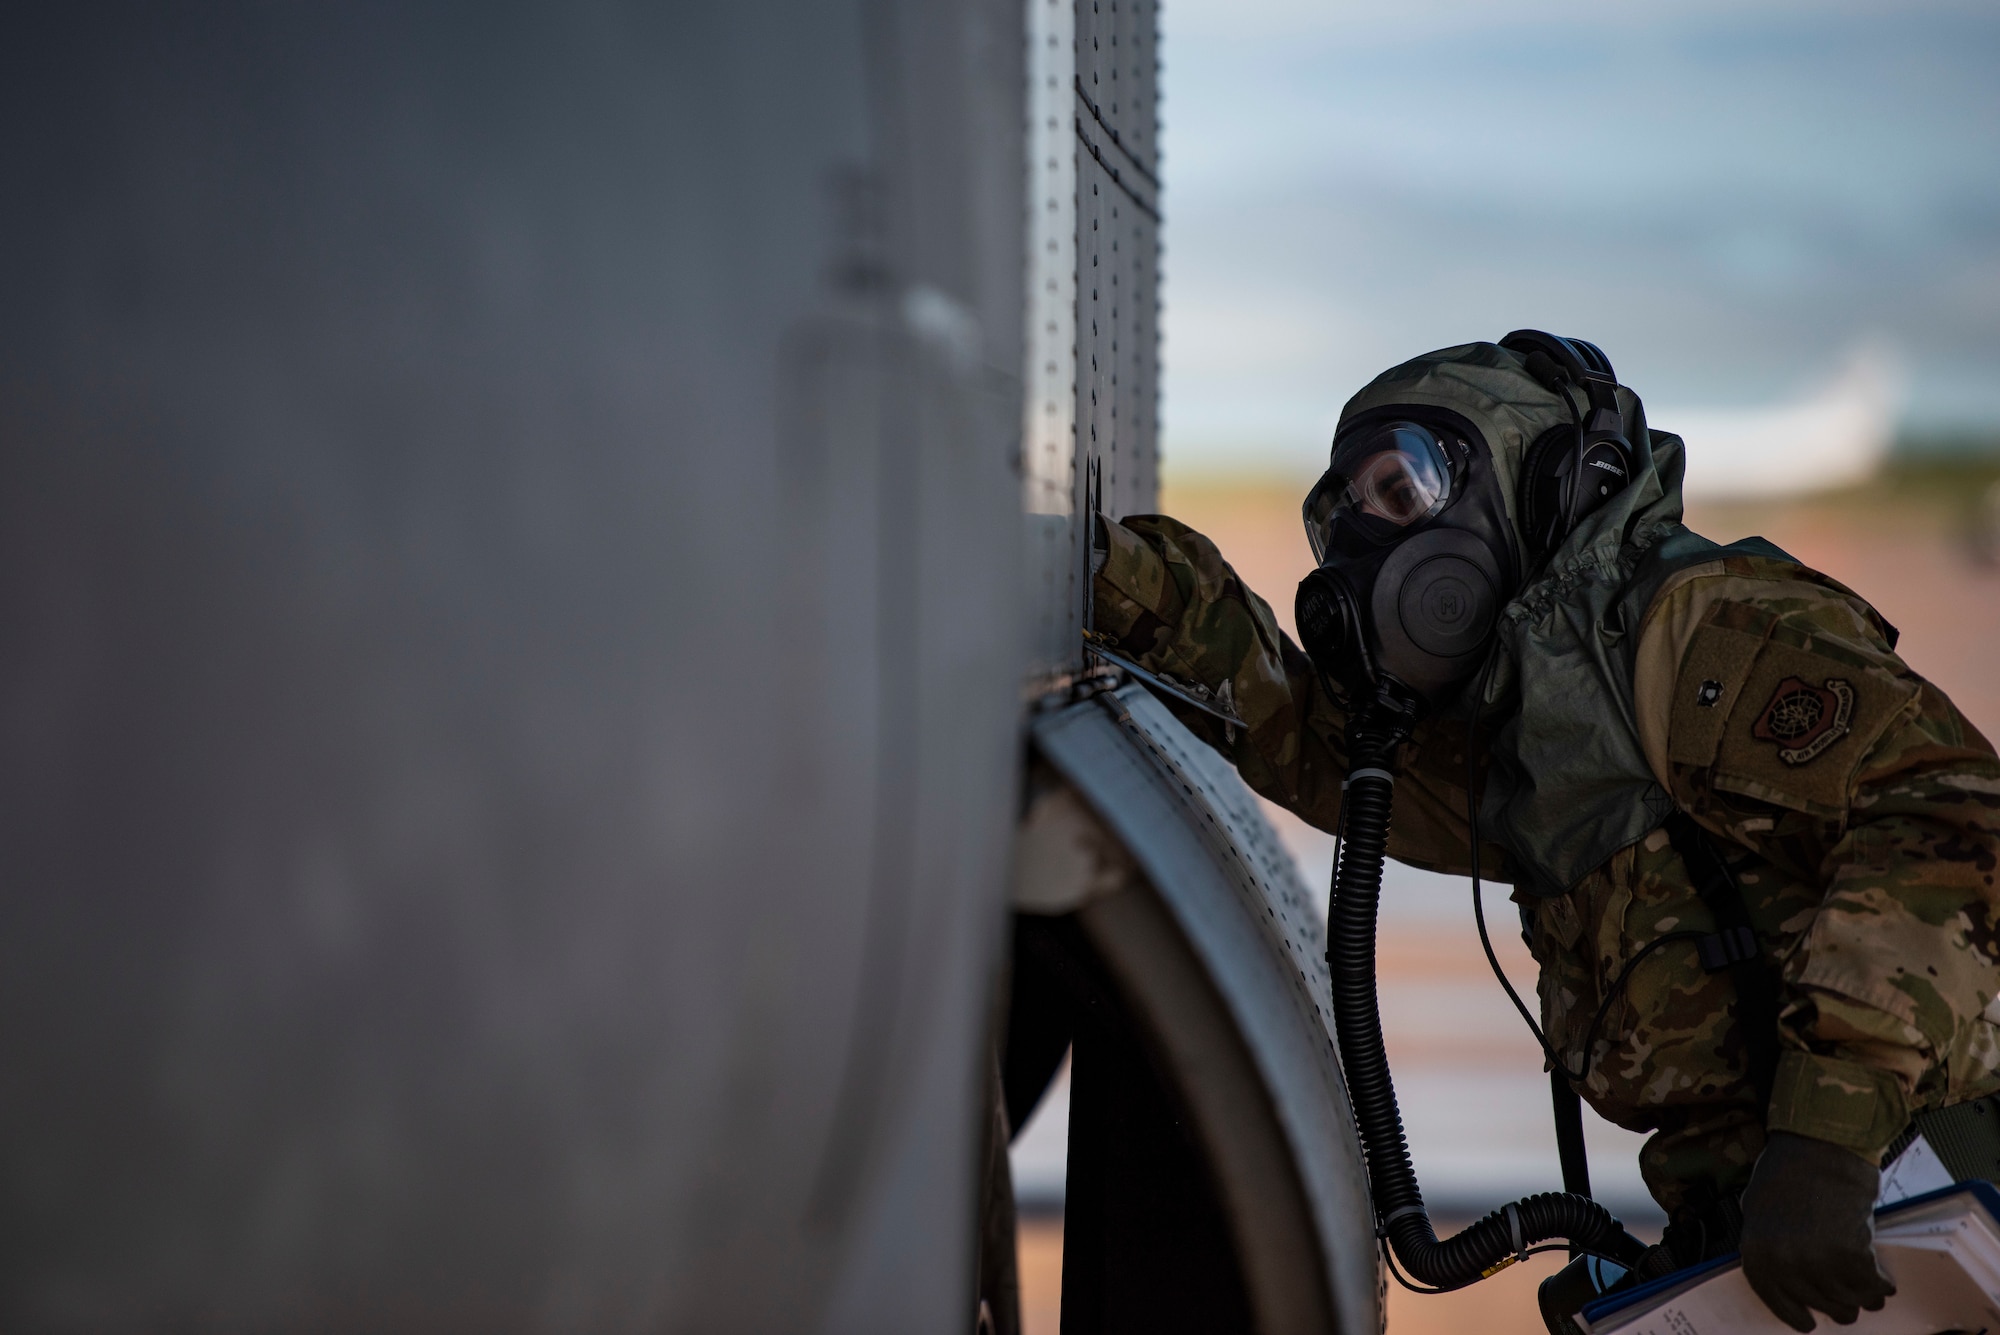 Senior Airman Noah Isom, 39th Airlift Squadron loadmaster, conducts preflight checks on a C-130J Super Hercules at Dyess Air Force Base, Texas, June 2, 2021. Aircrew assigned to the 317th Airlift Wing tested the functionality of the new Two-Piece Undergarment universal integrative ensemble chemical protective suit. (U.S. Air Force photo by Airman 1st Class Colin Hollowell)